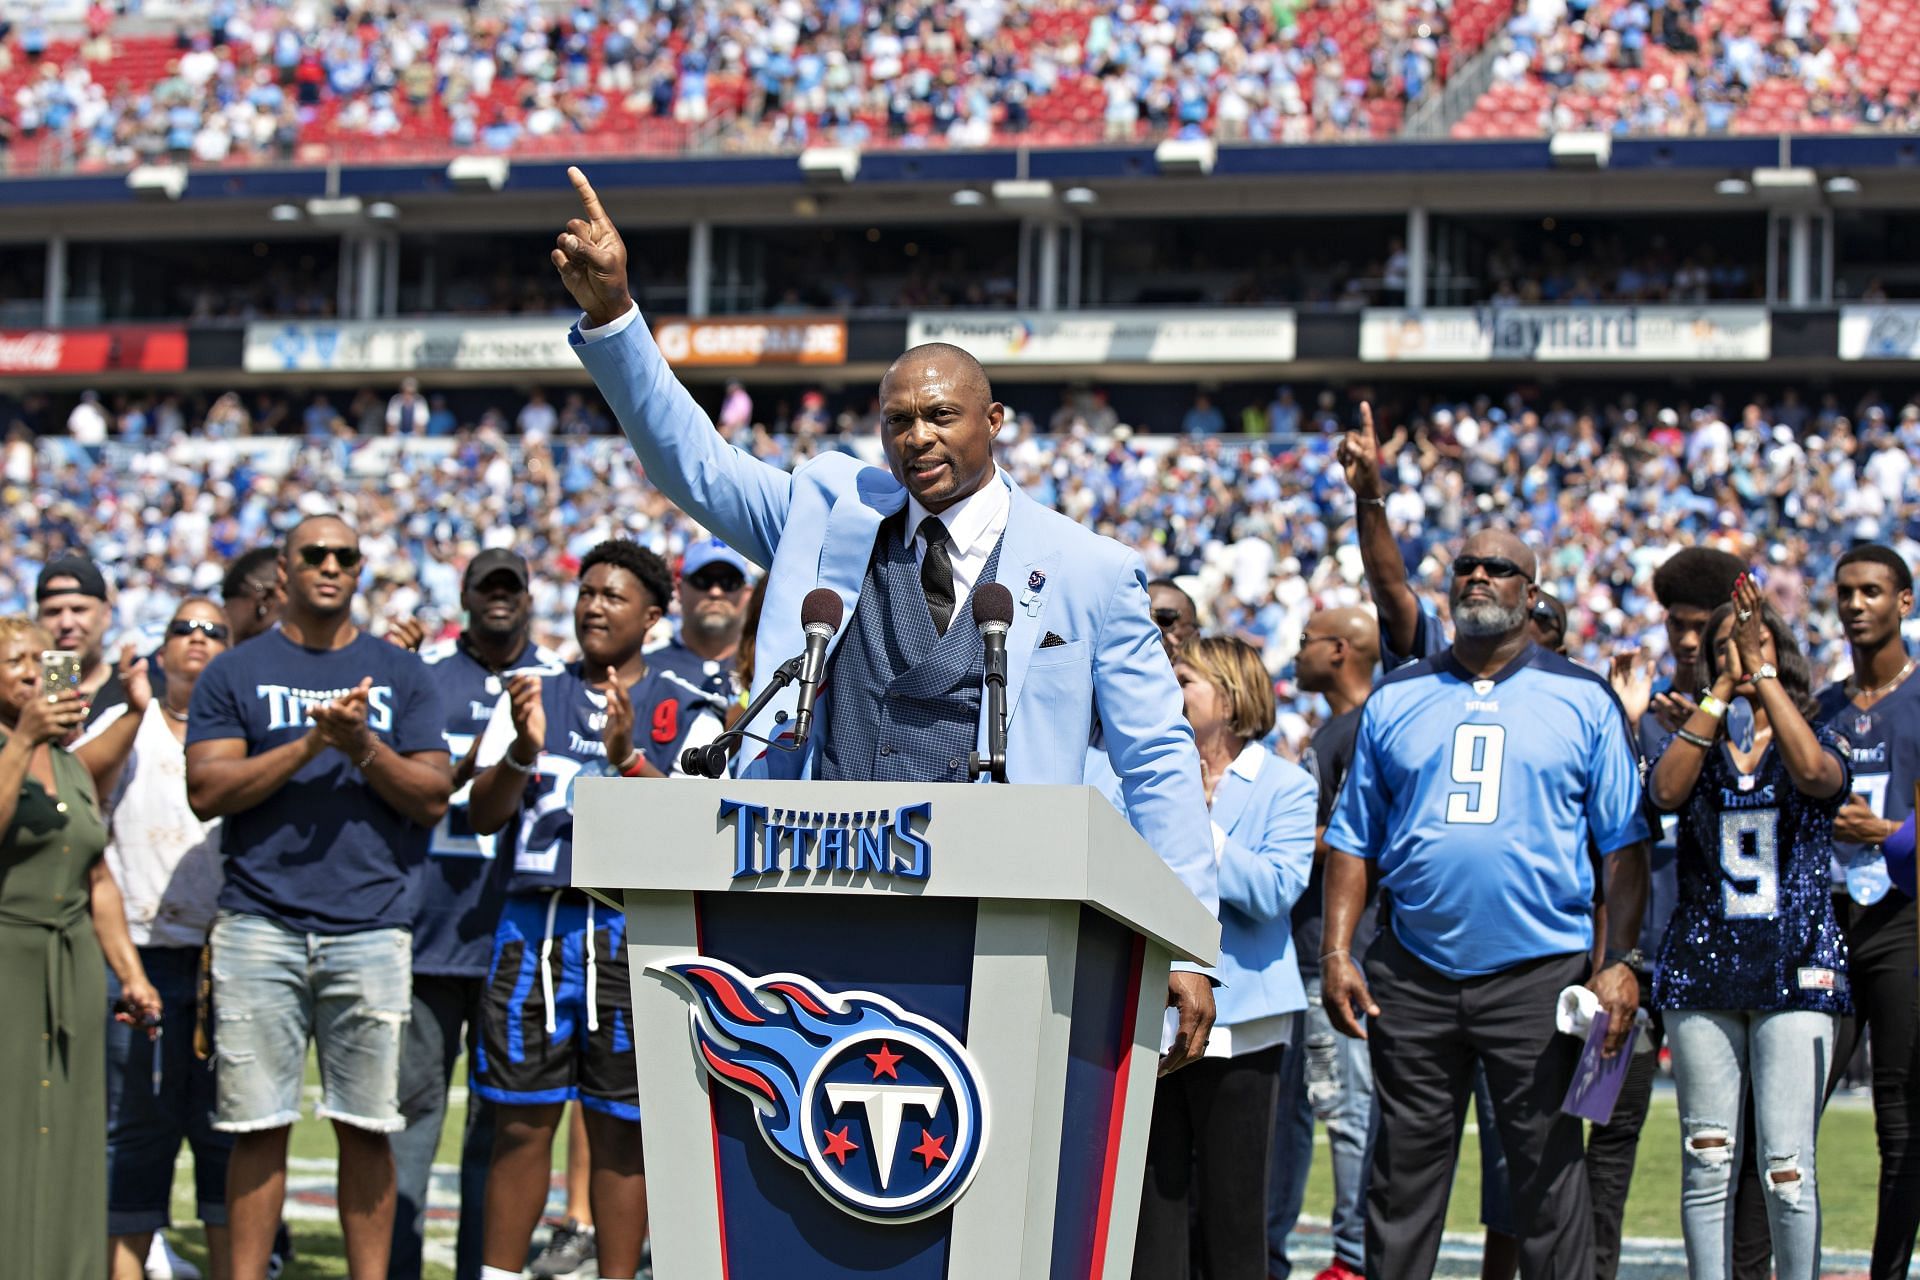 Eddie George was a legend at Ohio State and with the Tennessee Titans.